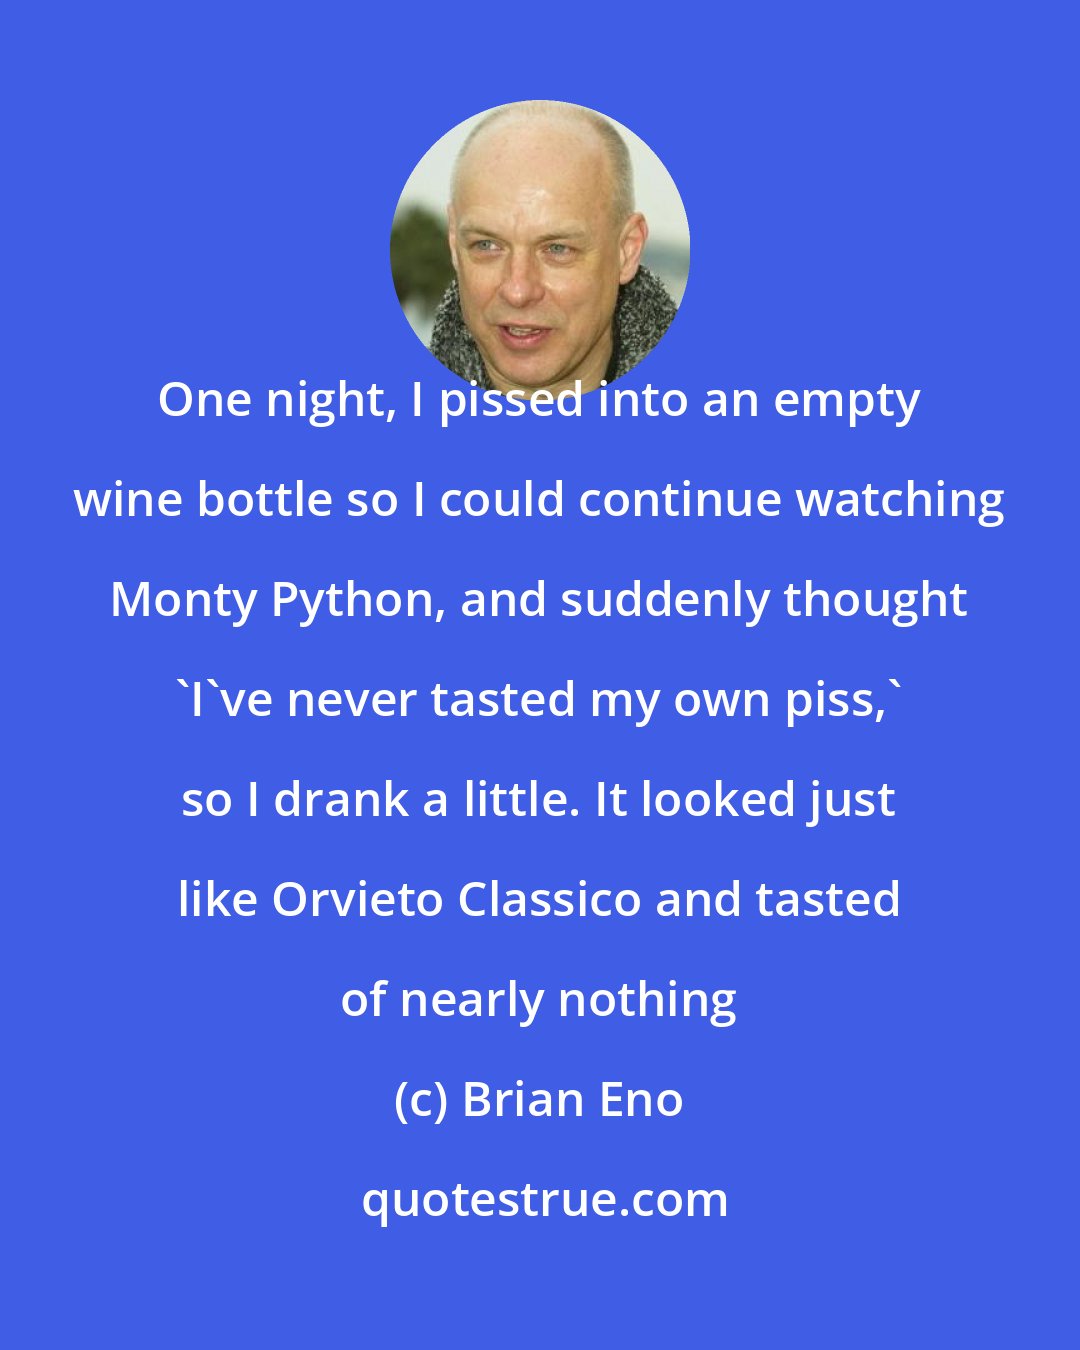 Brian Eno: One night, I pissed into an empty wine bottle so I could continue watching Monty Python, and suddenly thought 'I've never tasted my own piss,' so I drank a little. It looked just like Orvieto Classico and tasted of nearly nothing